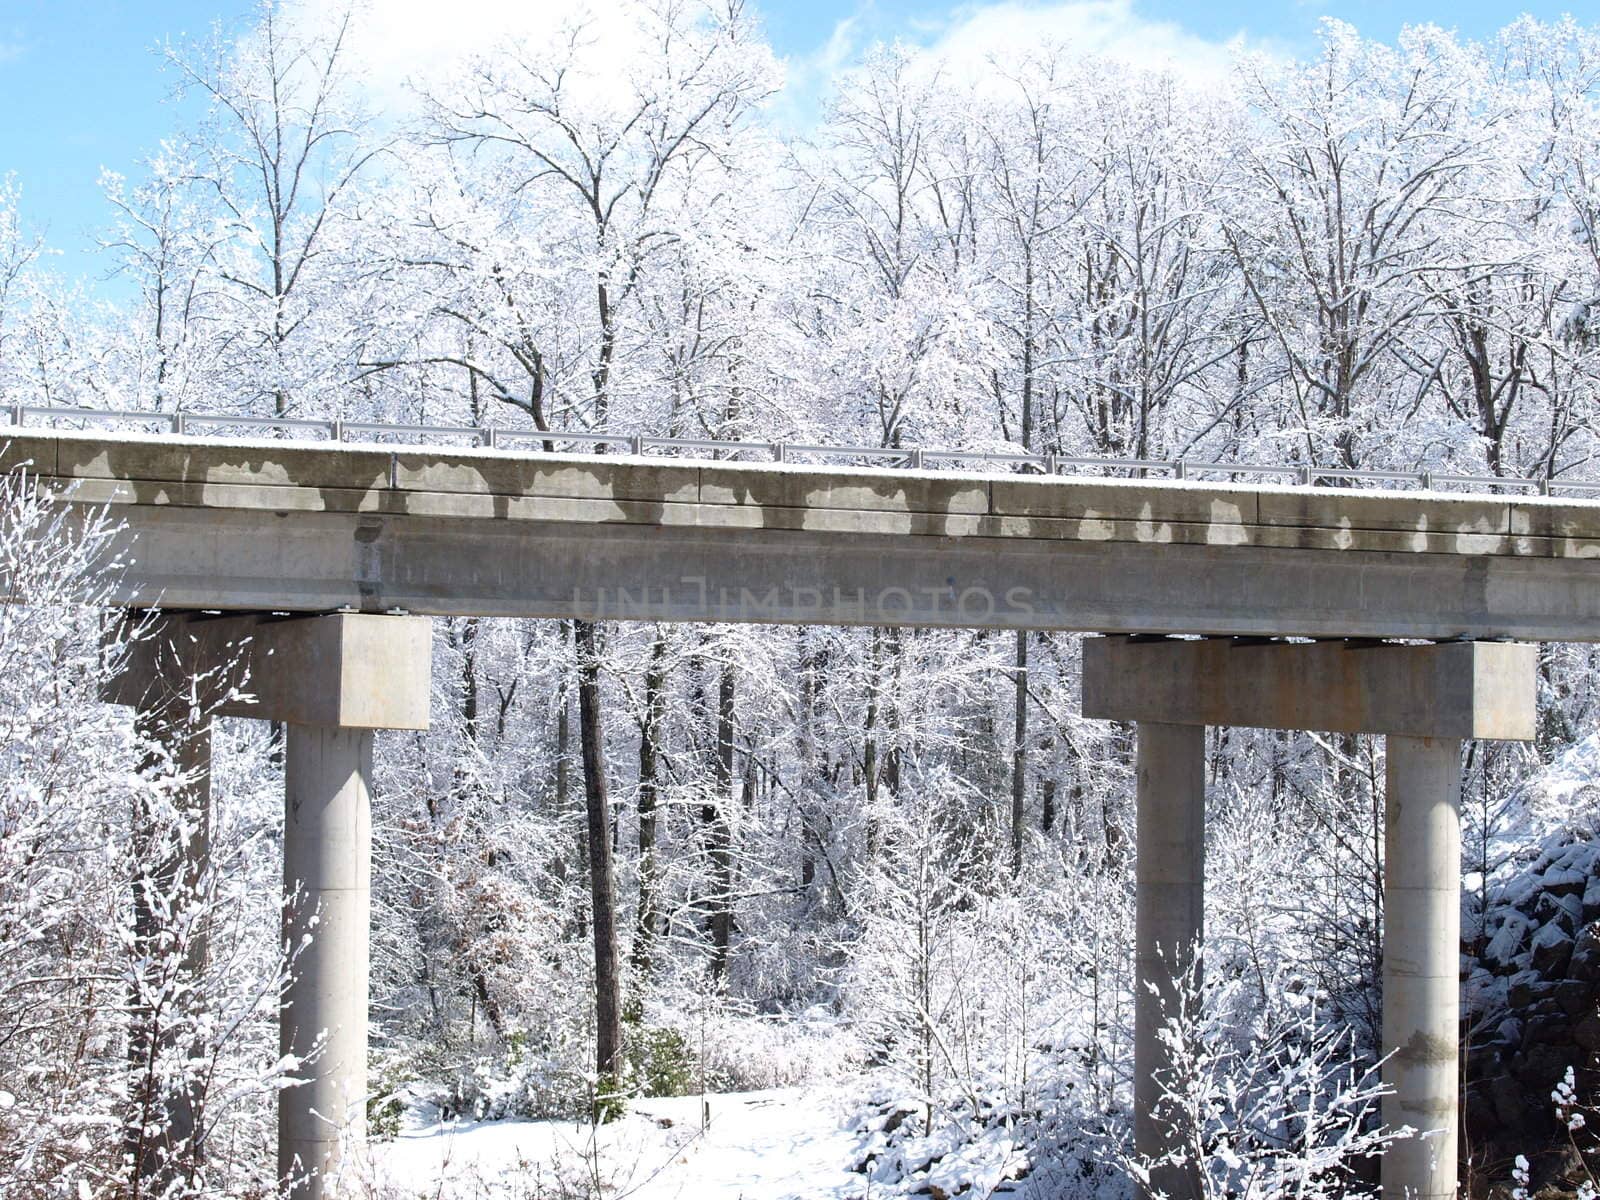 A bridge in winter after a snow storm